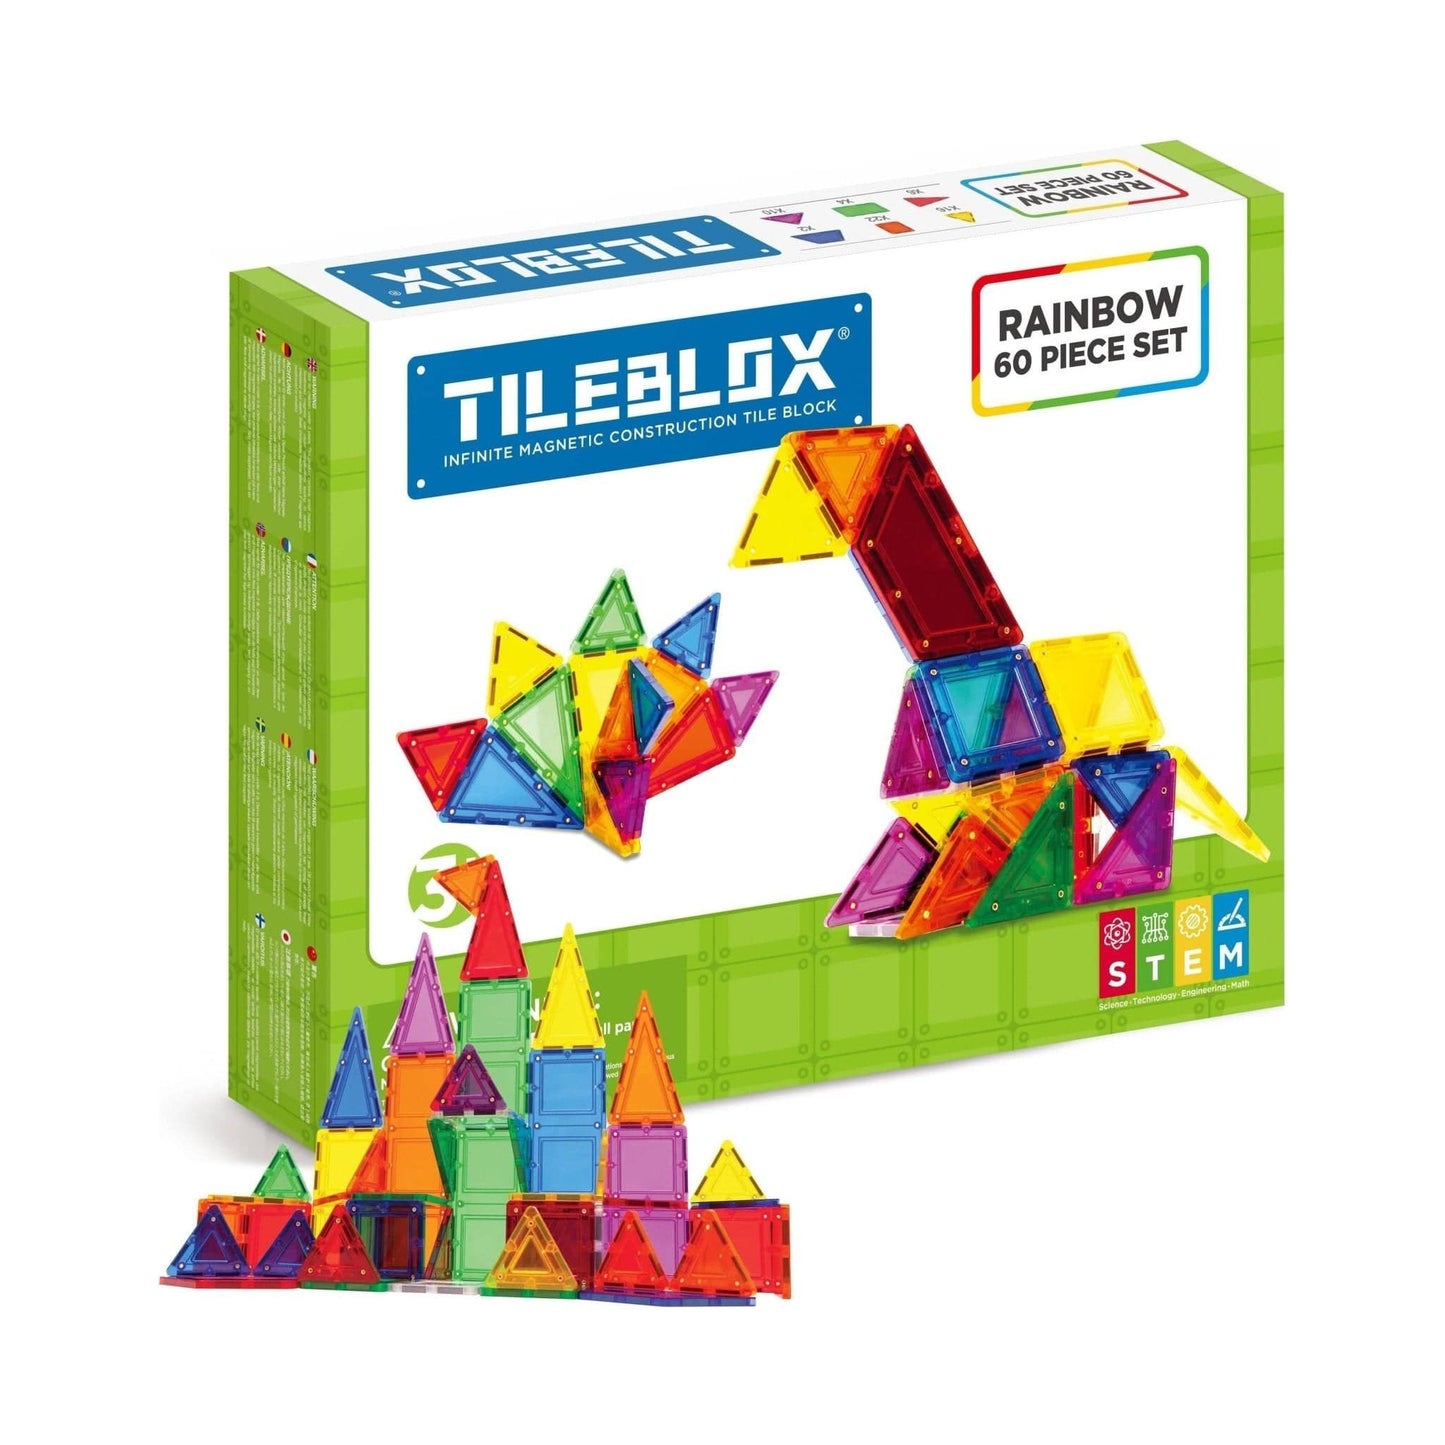 Magformers TileBlox Construction Toy 60 Piece Set  front of box with castle model